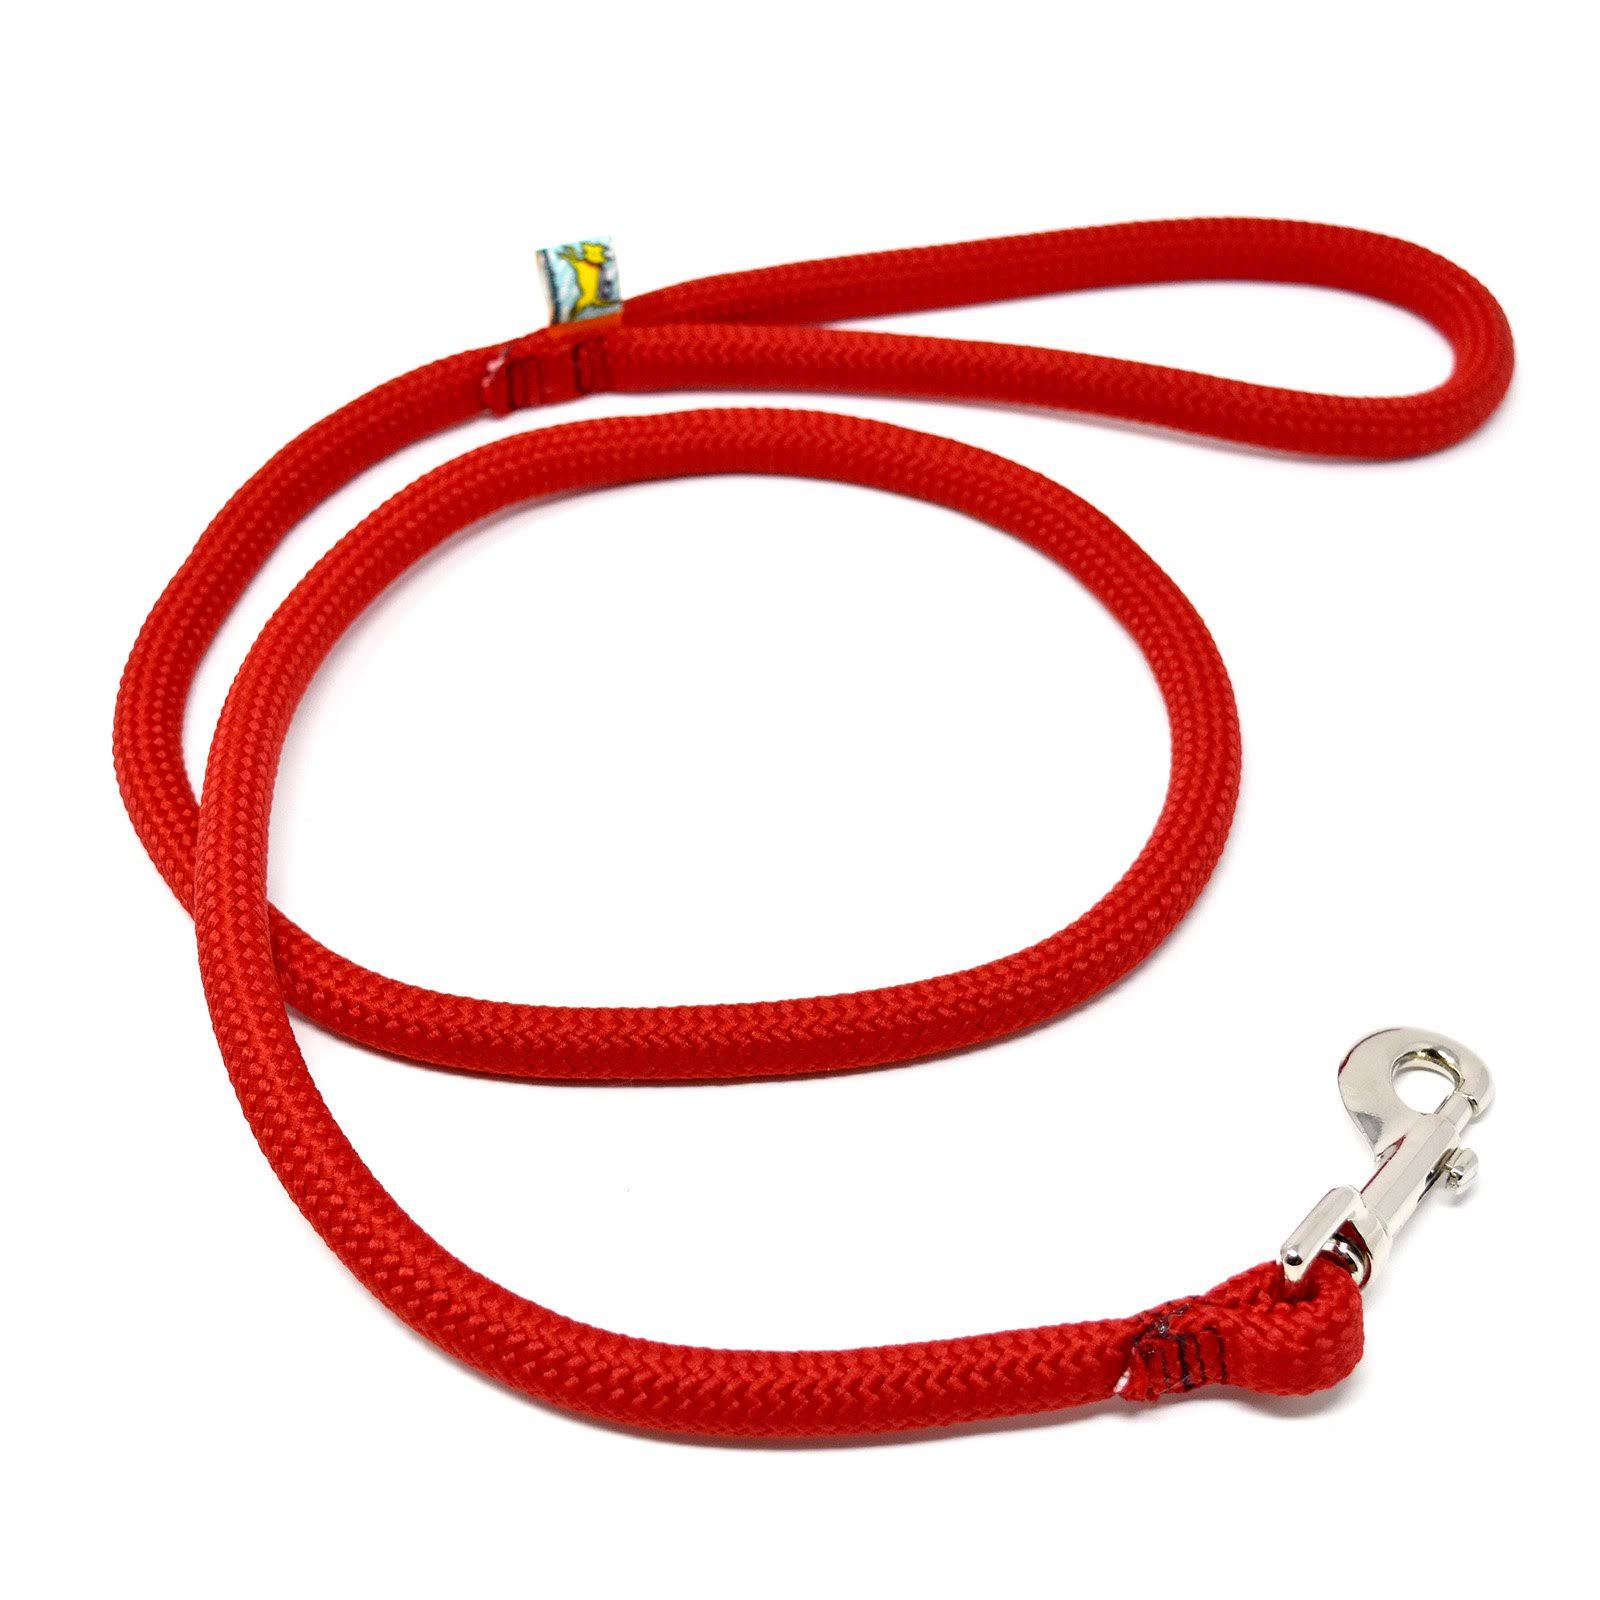 Yellow Dog Design Round Braided Rope Lead, RED.